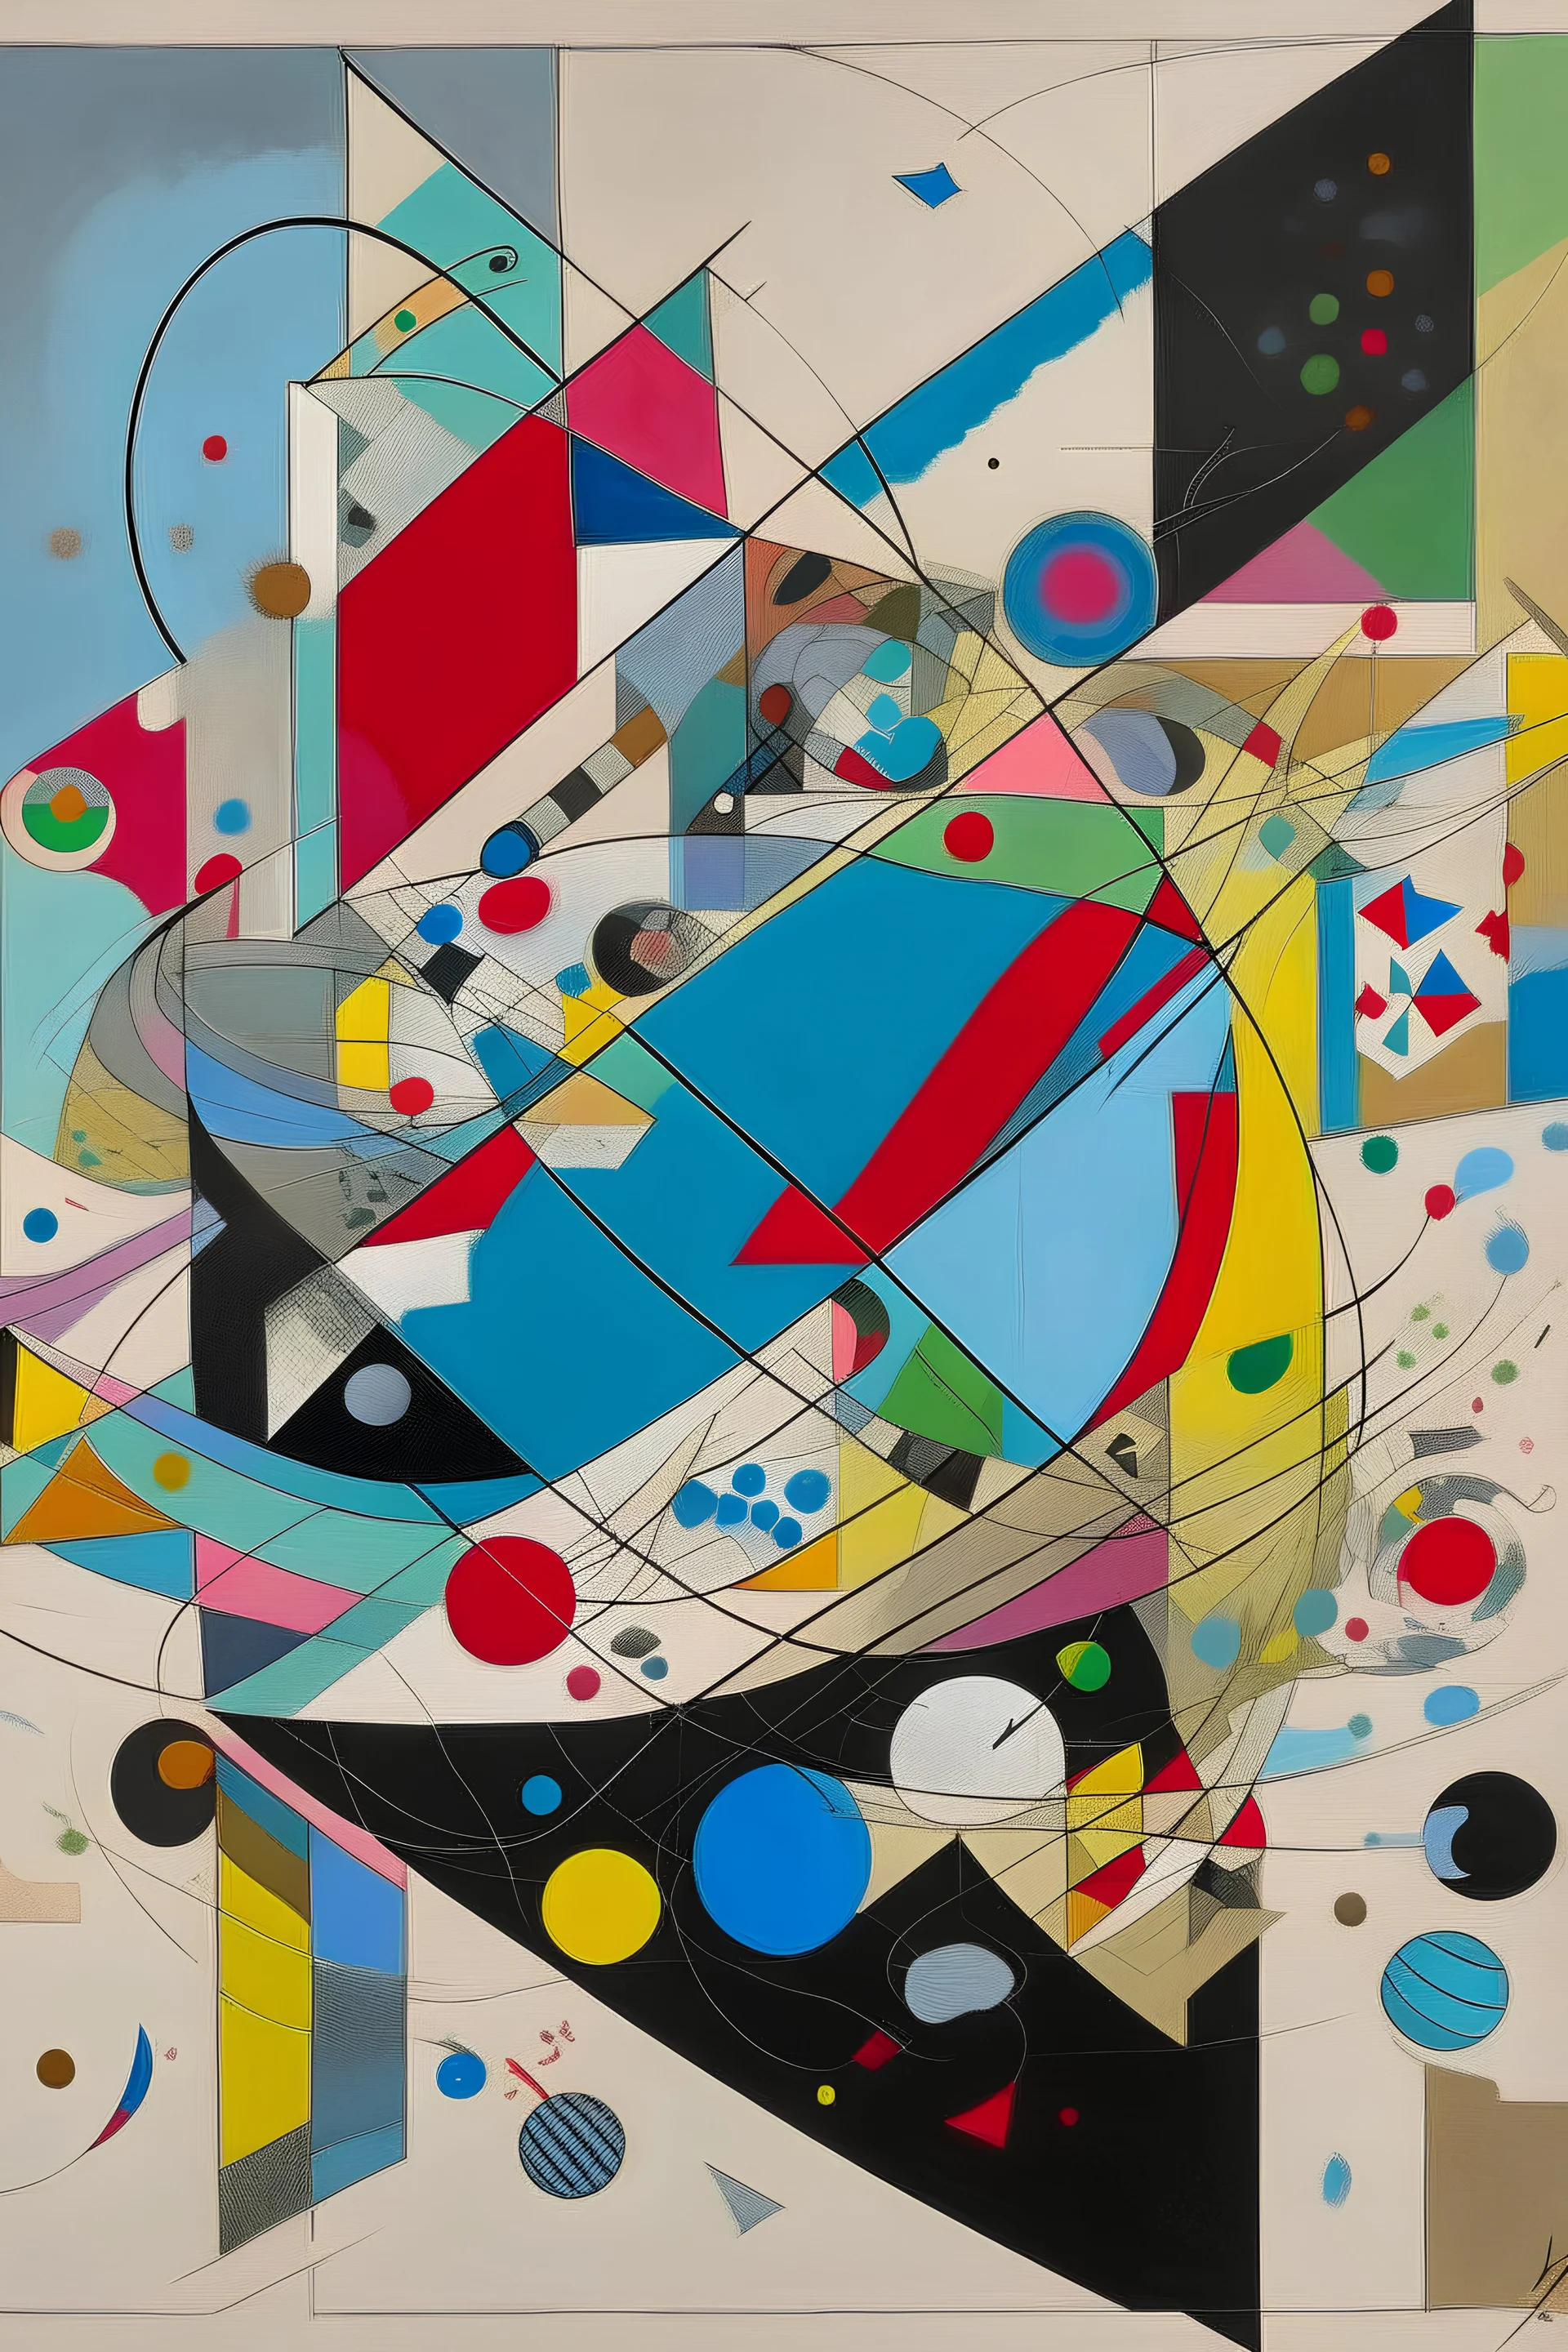 vasily kandinsky composition 8 painting into a styrofoam model that’s simple with geometrical shapes deconstructed and unseen ethereal forces and circles